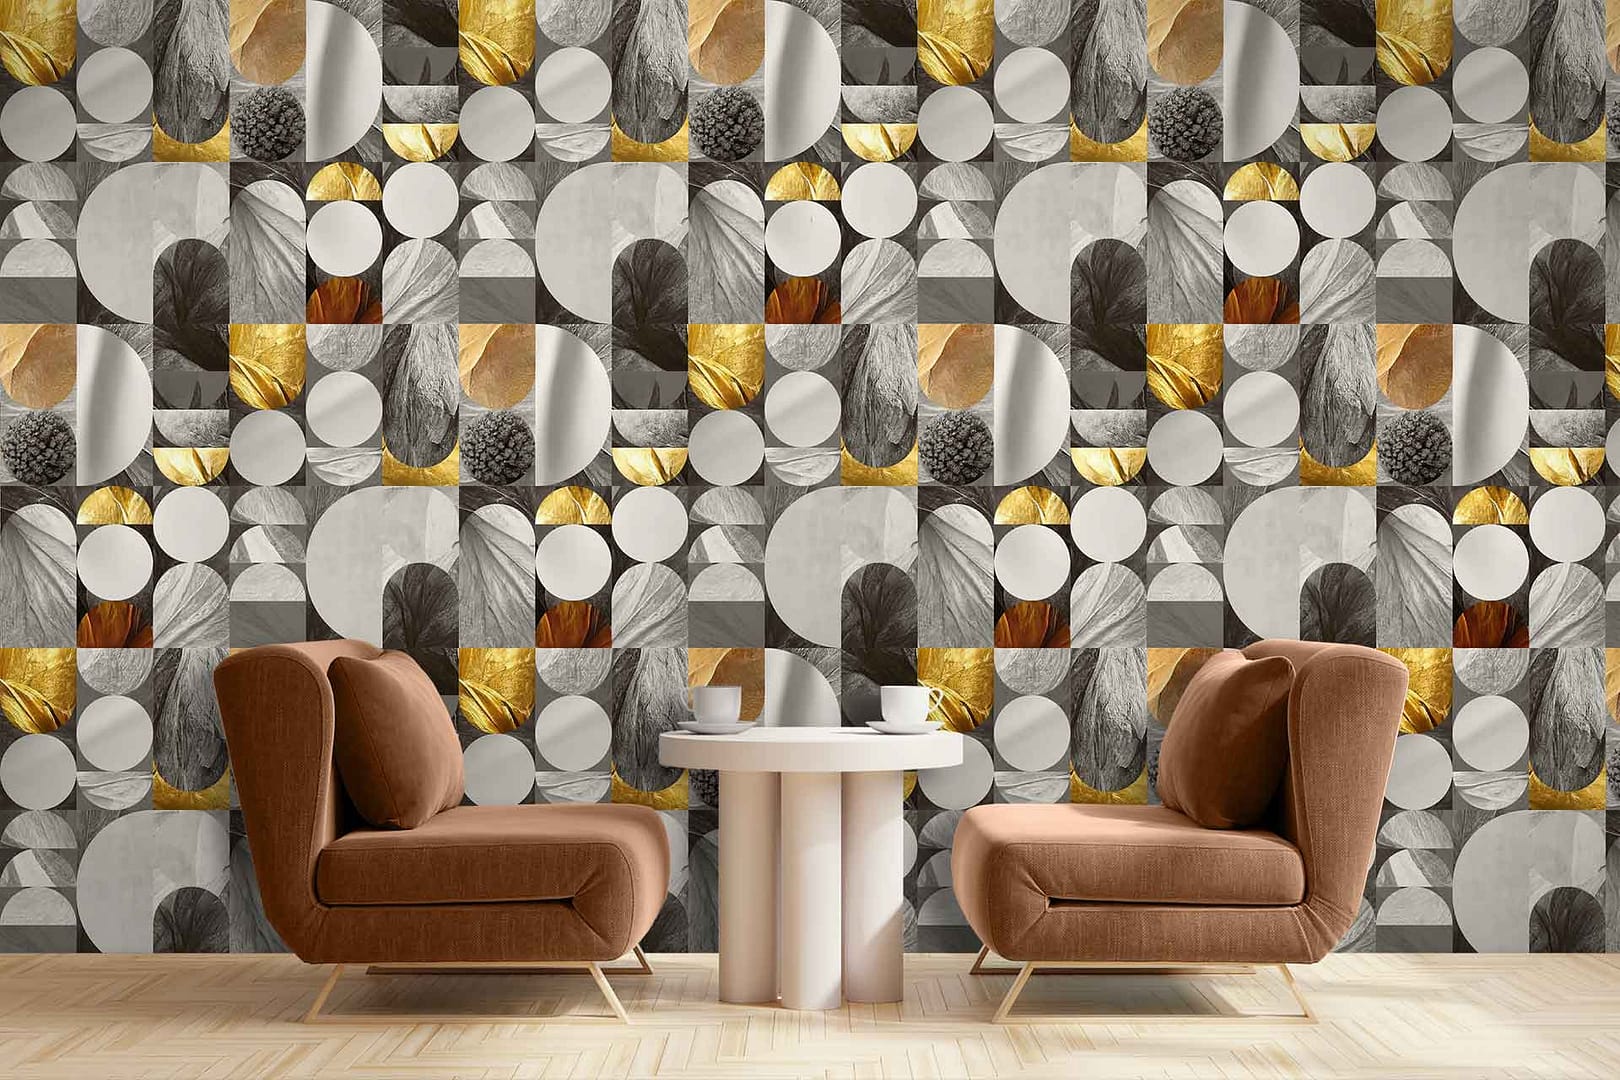 Golden Lining - a wallpaper created with various textured abstract shapes in grey scale and a few overlaid with gold by Cara Saven Wall Design